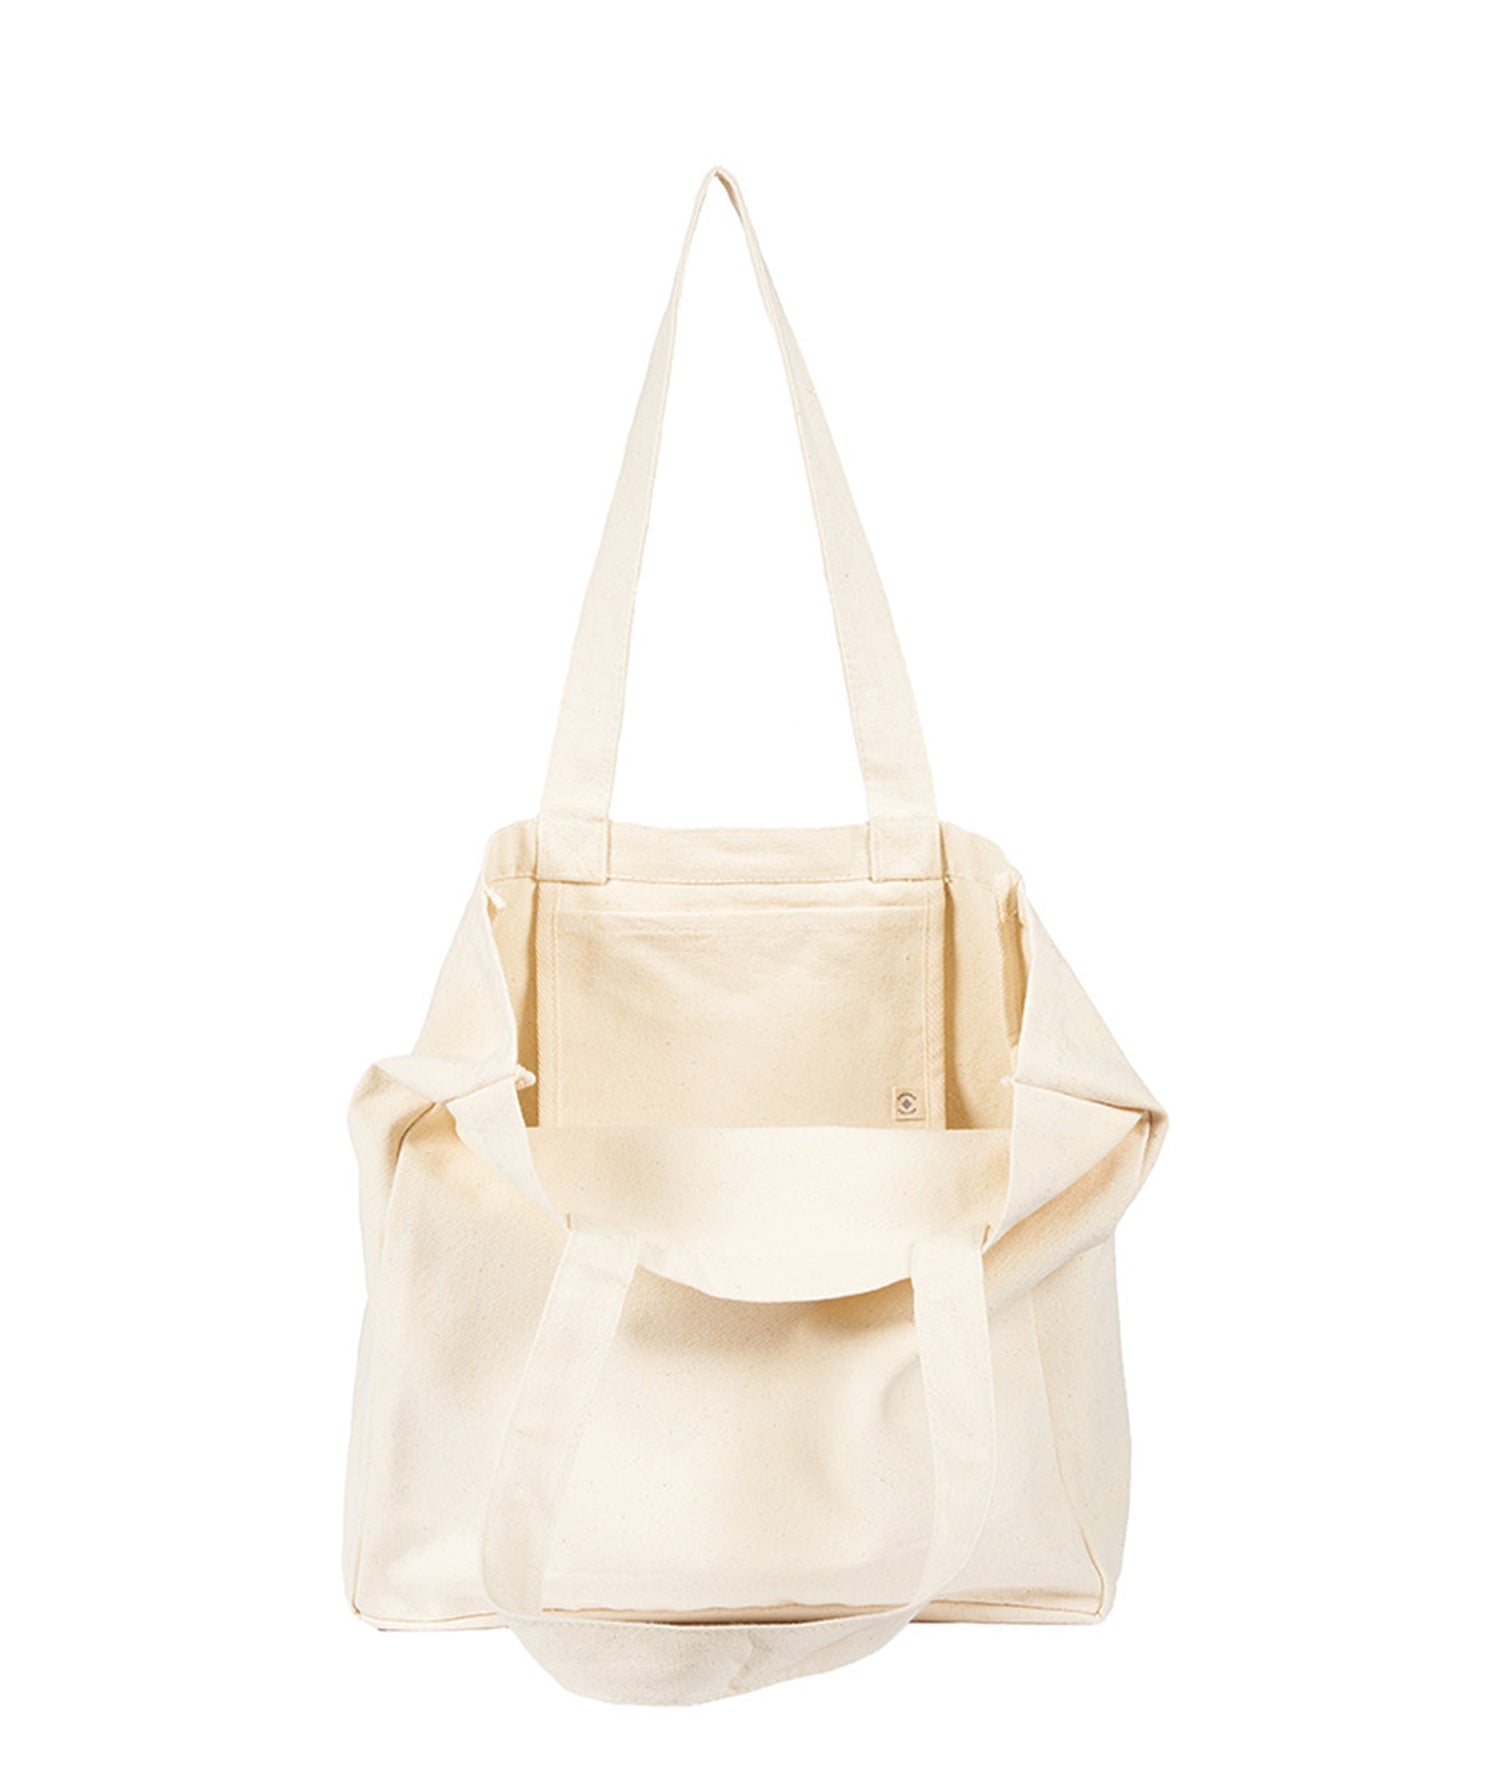 The Organic Goods Tote